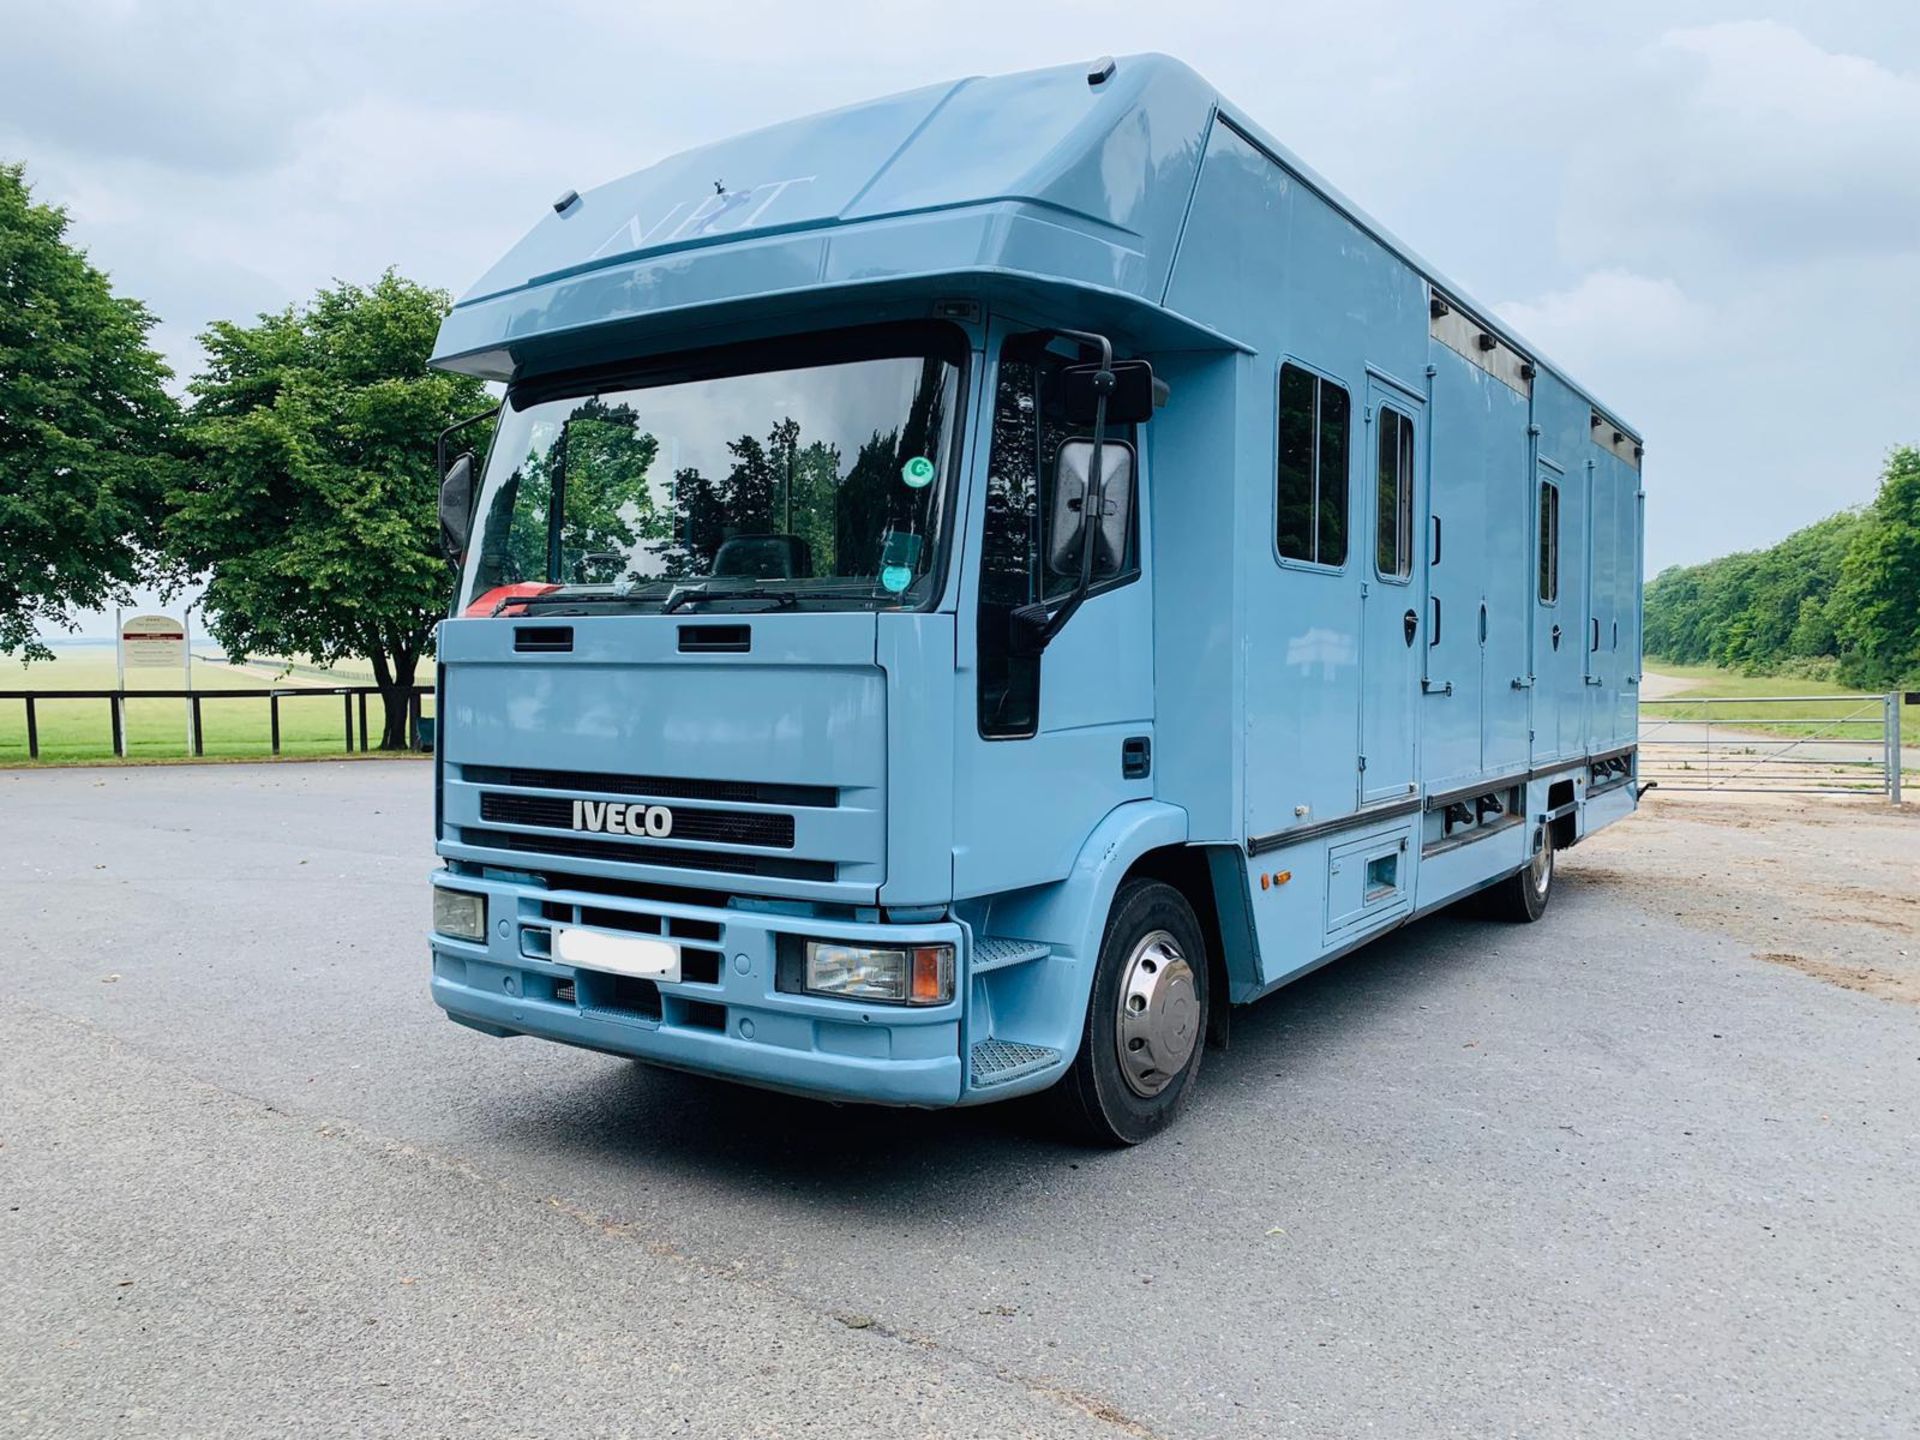 Iveco 110E18 'OLYMPIC' Horsebox 2001 - 6 Speed - Fits 4/6 Forward Facing Horses - Image 3 of 24